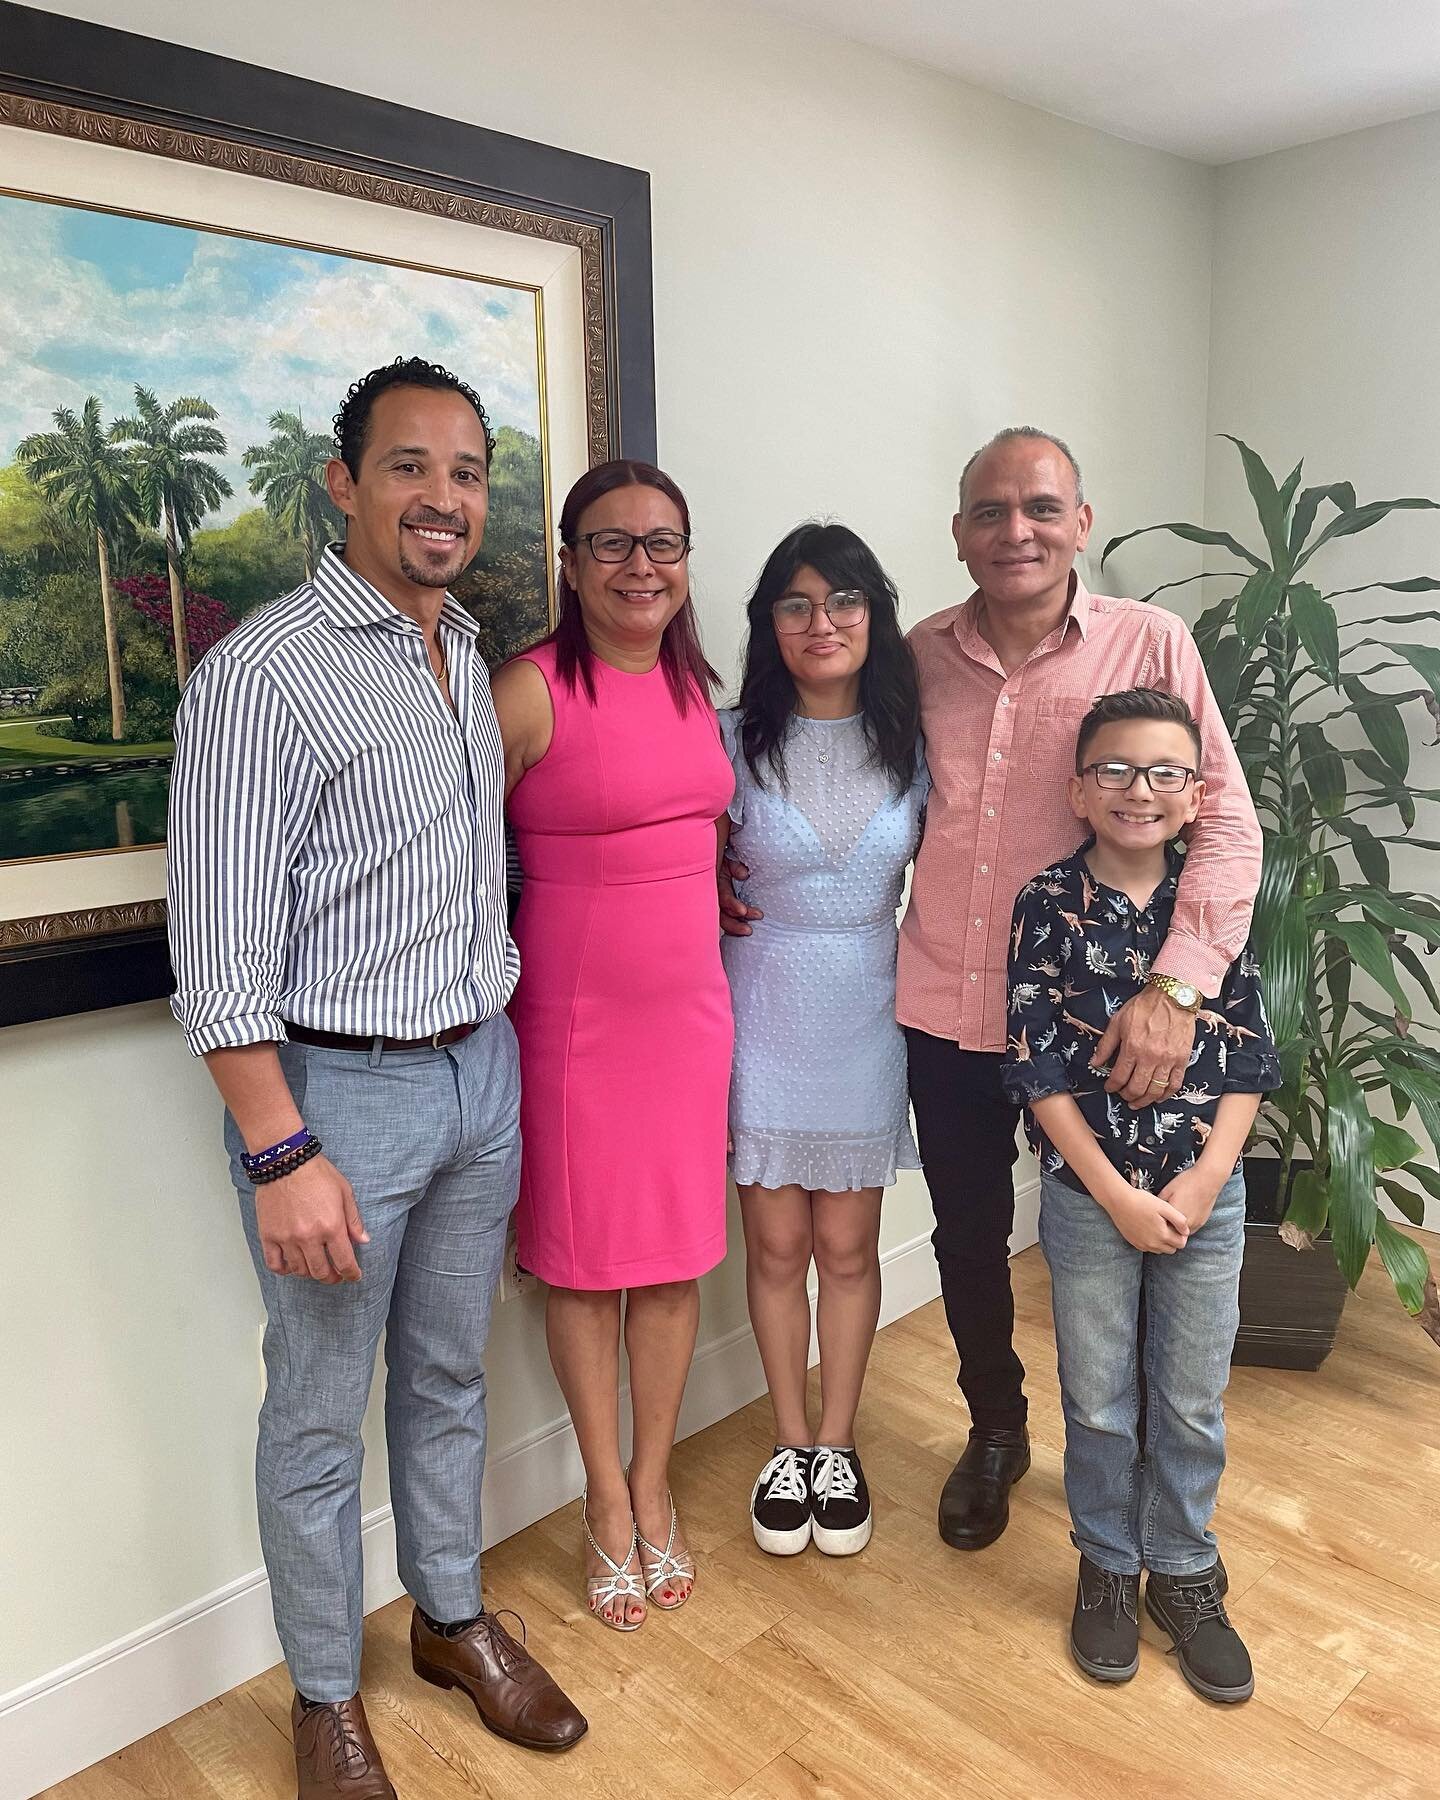 Closed! I was thrilled to be able to help my clients and their family find the home of their dreams. It was a long and arduous process, but we got it done. They&rsquo;ll be eating from the mango and avocado trees for many years to come!
.
.
.
#miami 